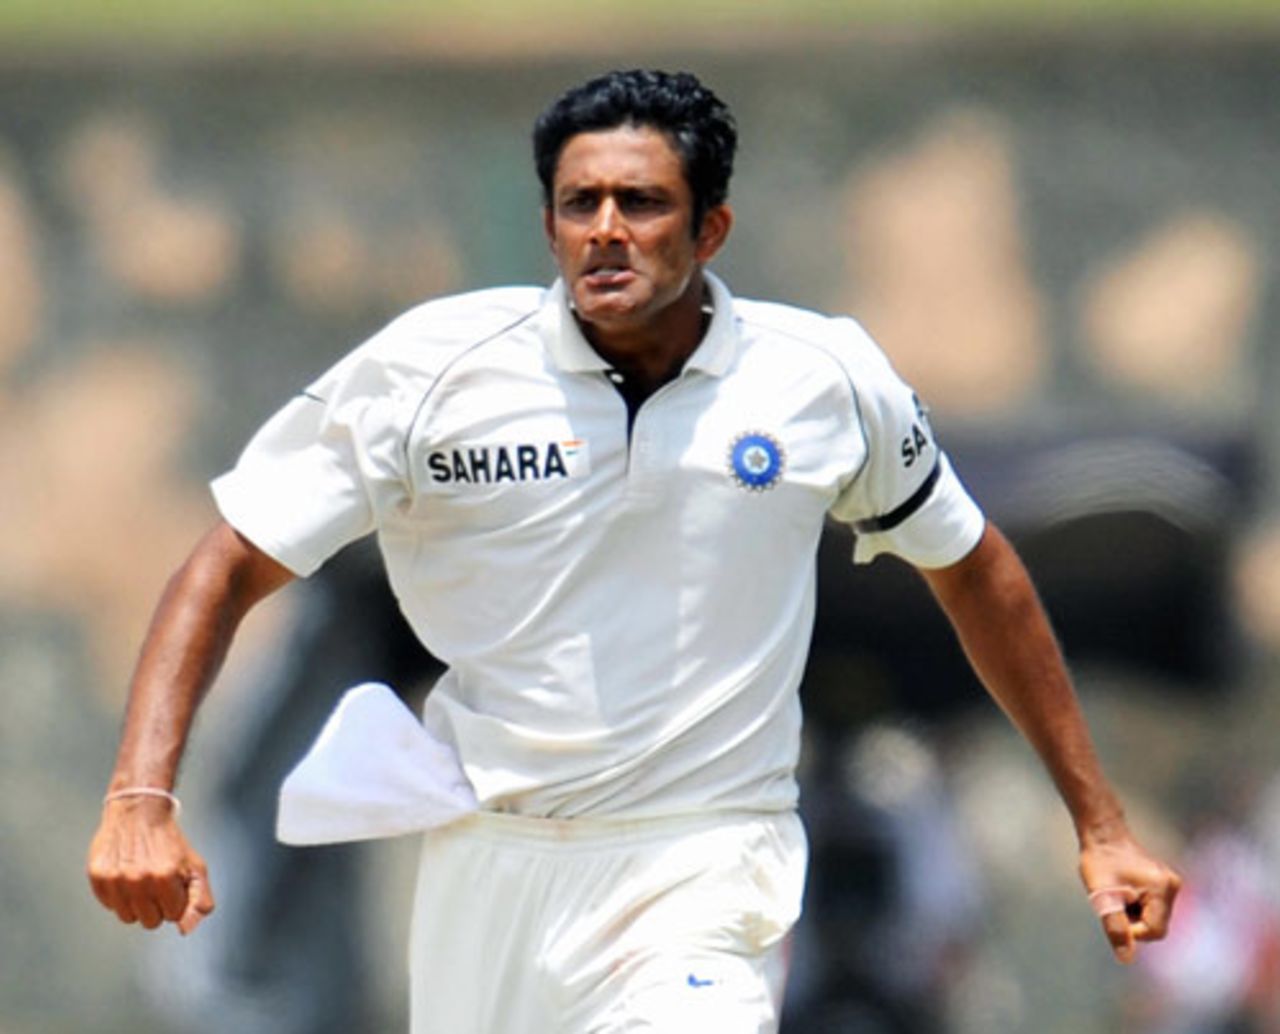 Anil Kumble is charged up after getting Mahela Jayawardene's wicket, Sri Lanka v India, 2nd Test, Galle, 3rd day, August 2, 2008